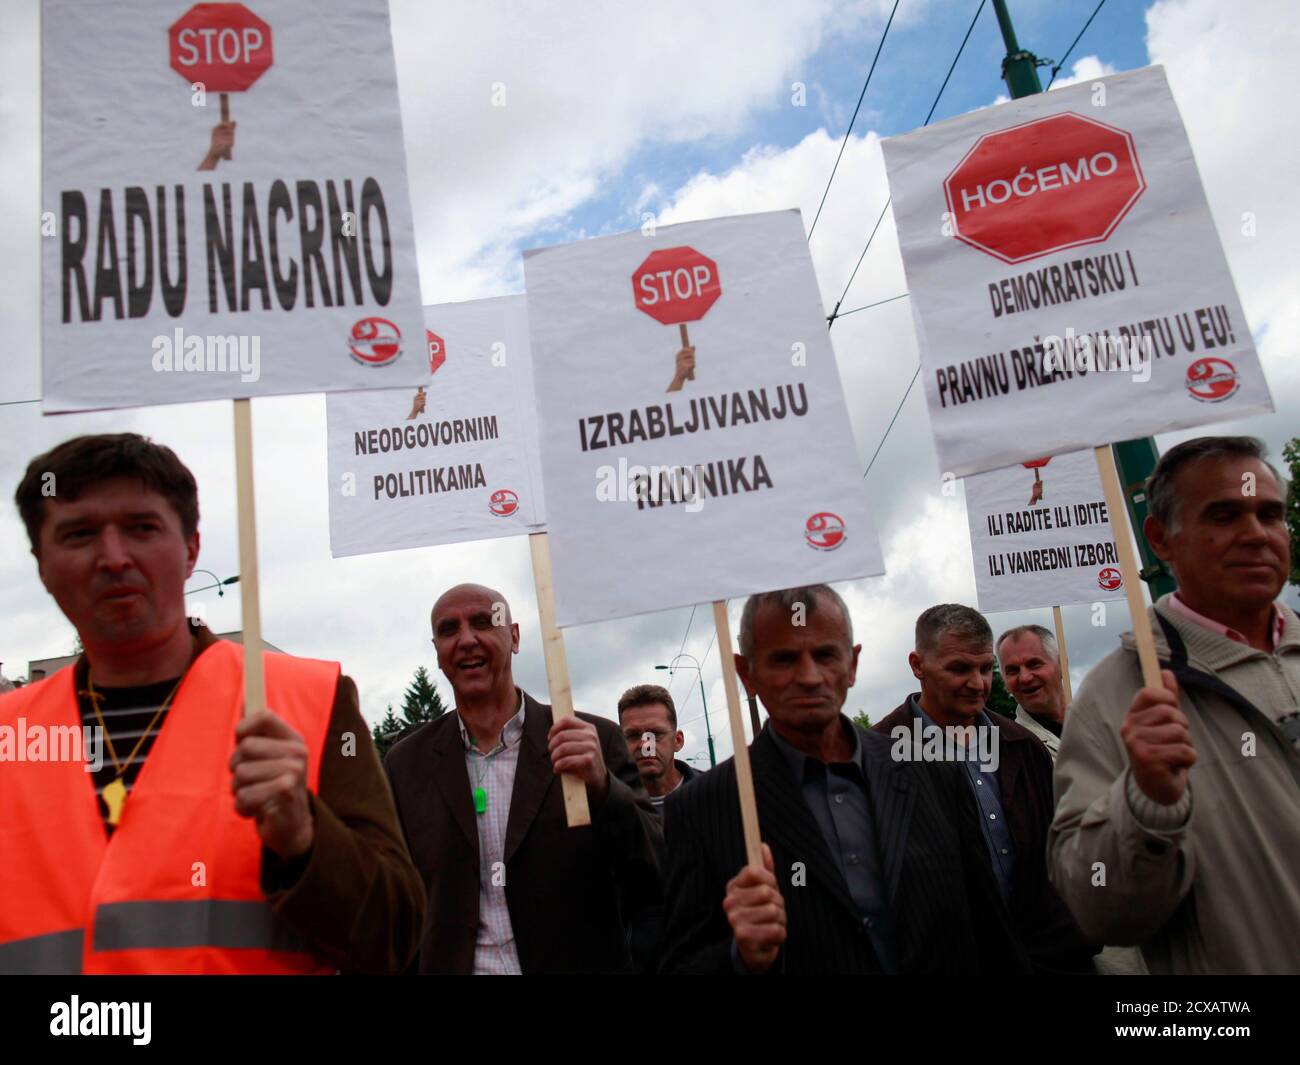 Workers with placards protest in Sarajevo May 30, 2013. Thousands of workers took to the streets in the Bosnian capital on Thursday to request more rights in the first mass protest in years in the impoverished Balkan country. Some 5,000 people from the Federation of Bosnian Muslims and Croats, which together with the Serb republic makes up Bosnia, took part in the peaceful protests staged by trade unions in a sign that their patience was running thin. Placards read,  'Stop Illegal work' (L), and 'Stop the explotation of workers' (2nd R).    REUTERS/Dado Ruvic (BOSNIA AND HERZEGOVINA - Tags: BU Stock Photo